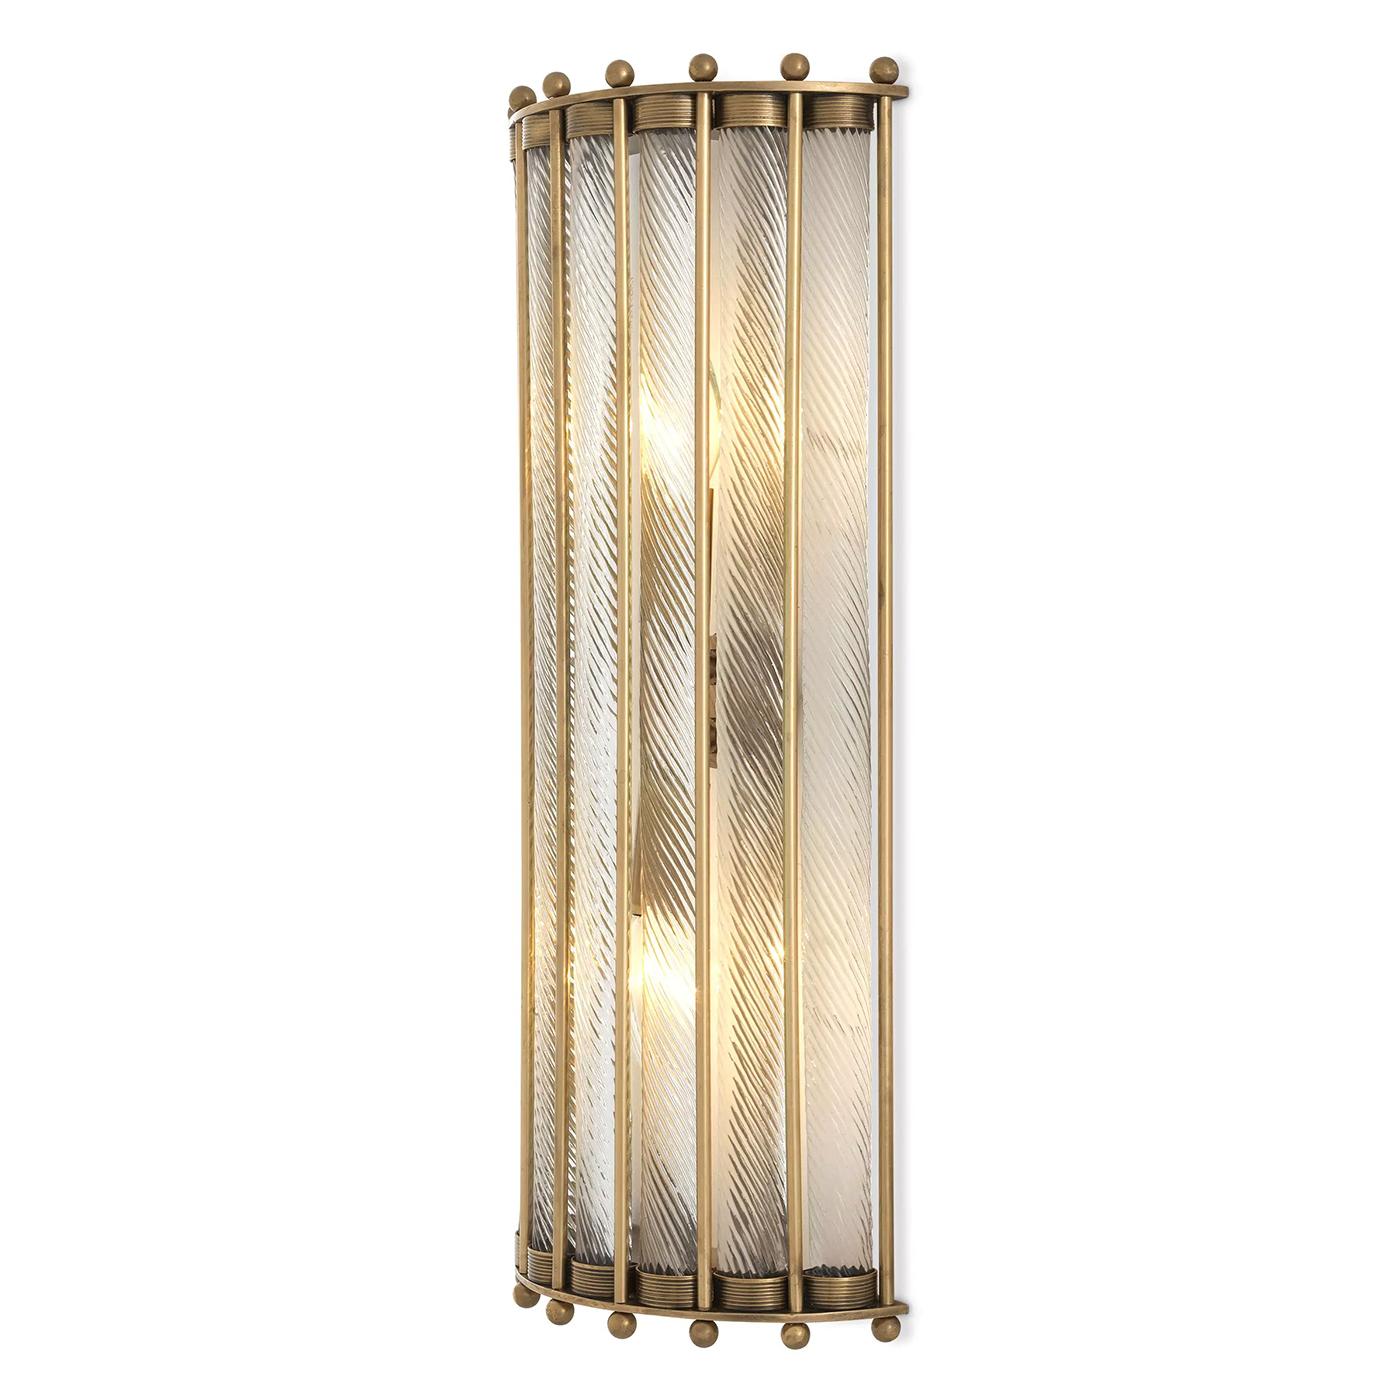 Wall Lamp Mezzo Single with solid brass structure in
Antique finish. With clear glass. 2 bulbs, lamp holder
type E14, 25 watt, 220-240 volt. Ampoules non incluses.
Dimmable, dimmer not included.